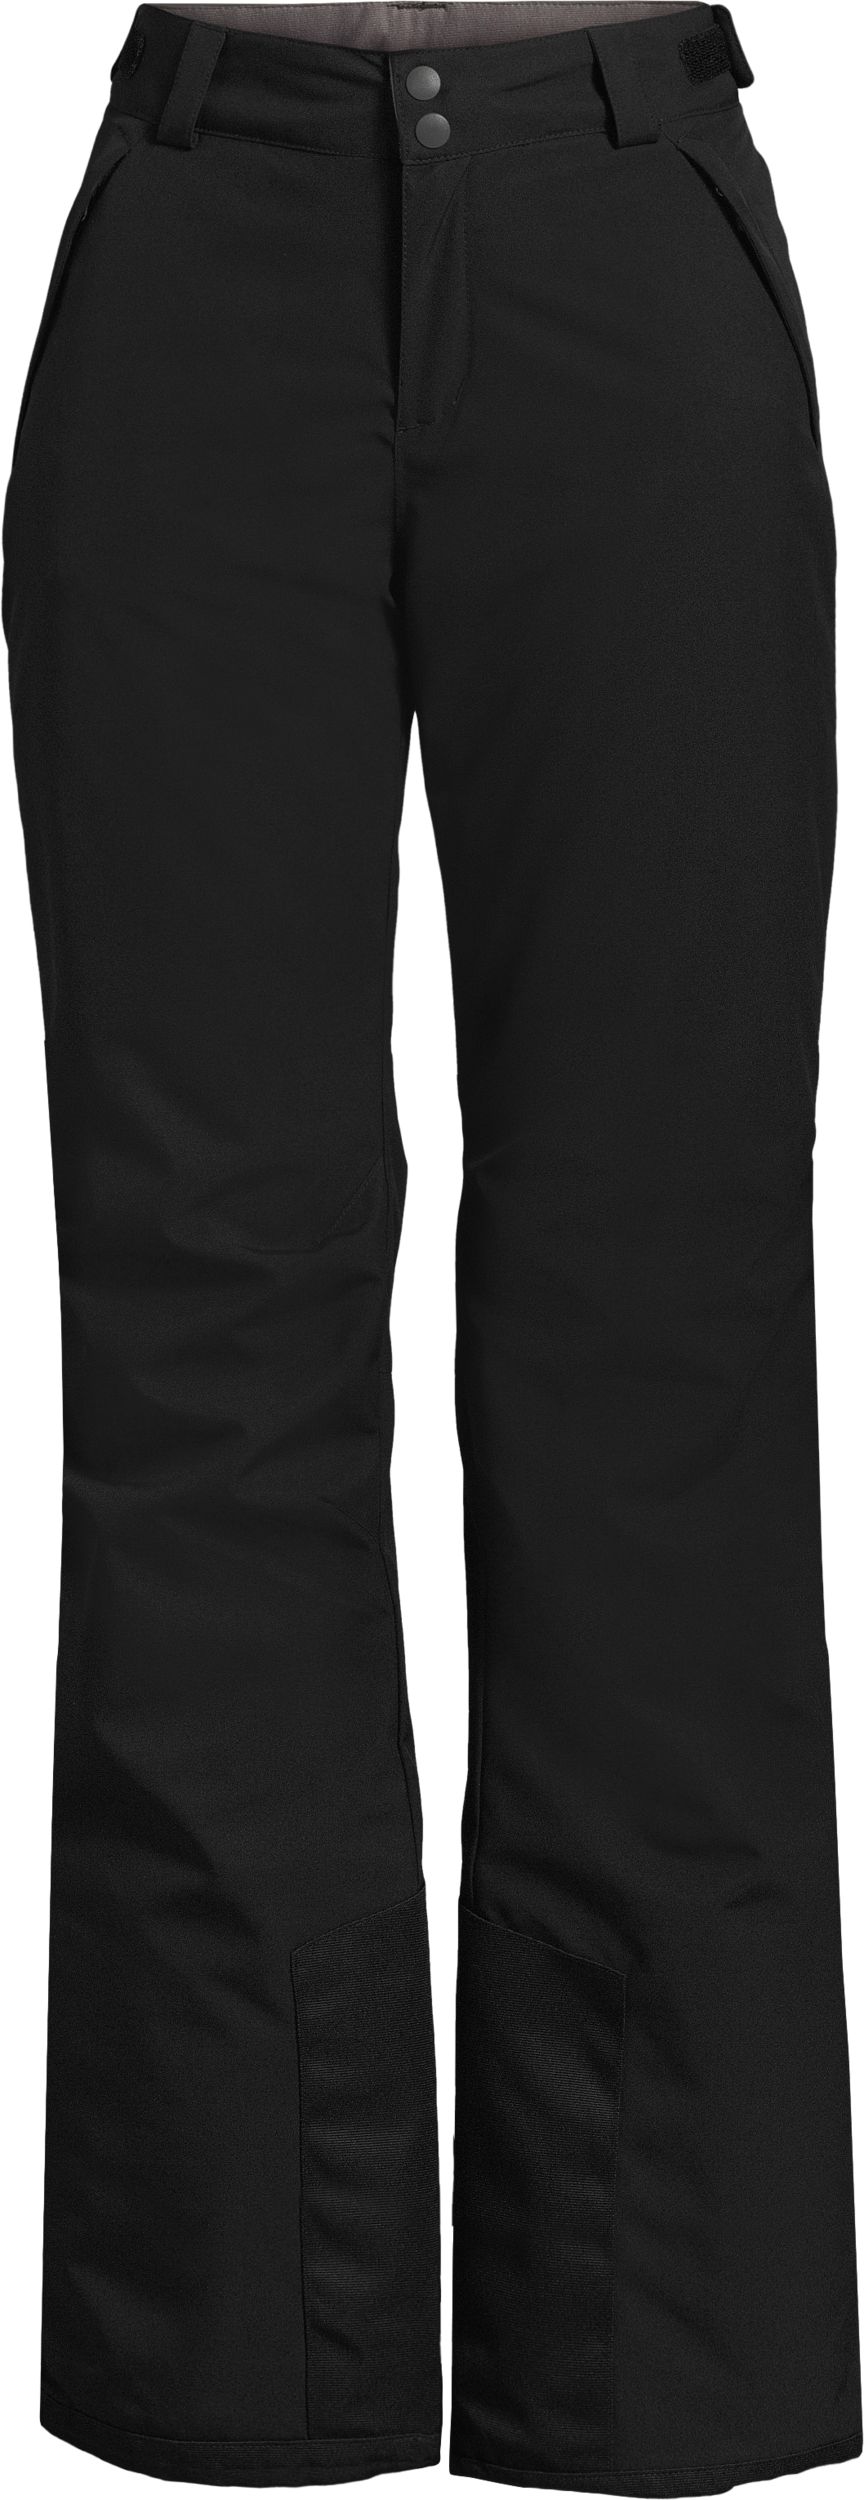 Spyder Women's Section Insulated Ski Pant